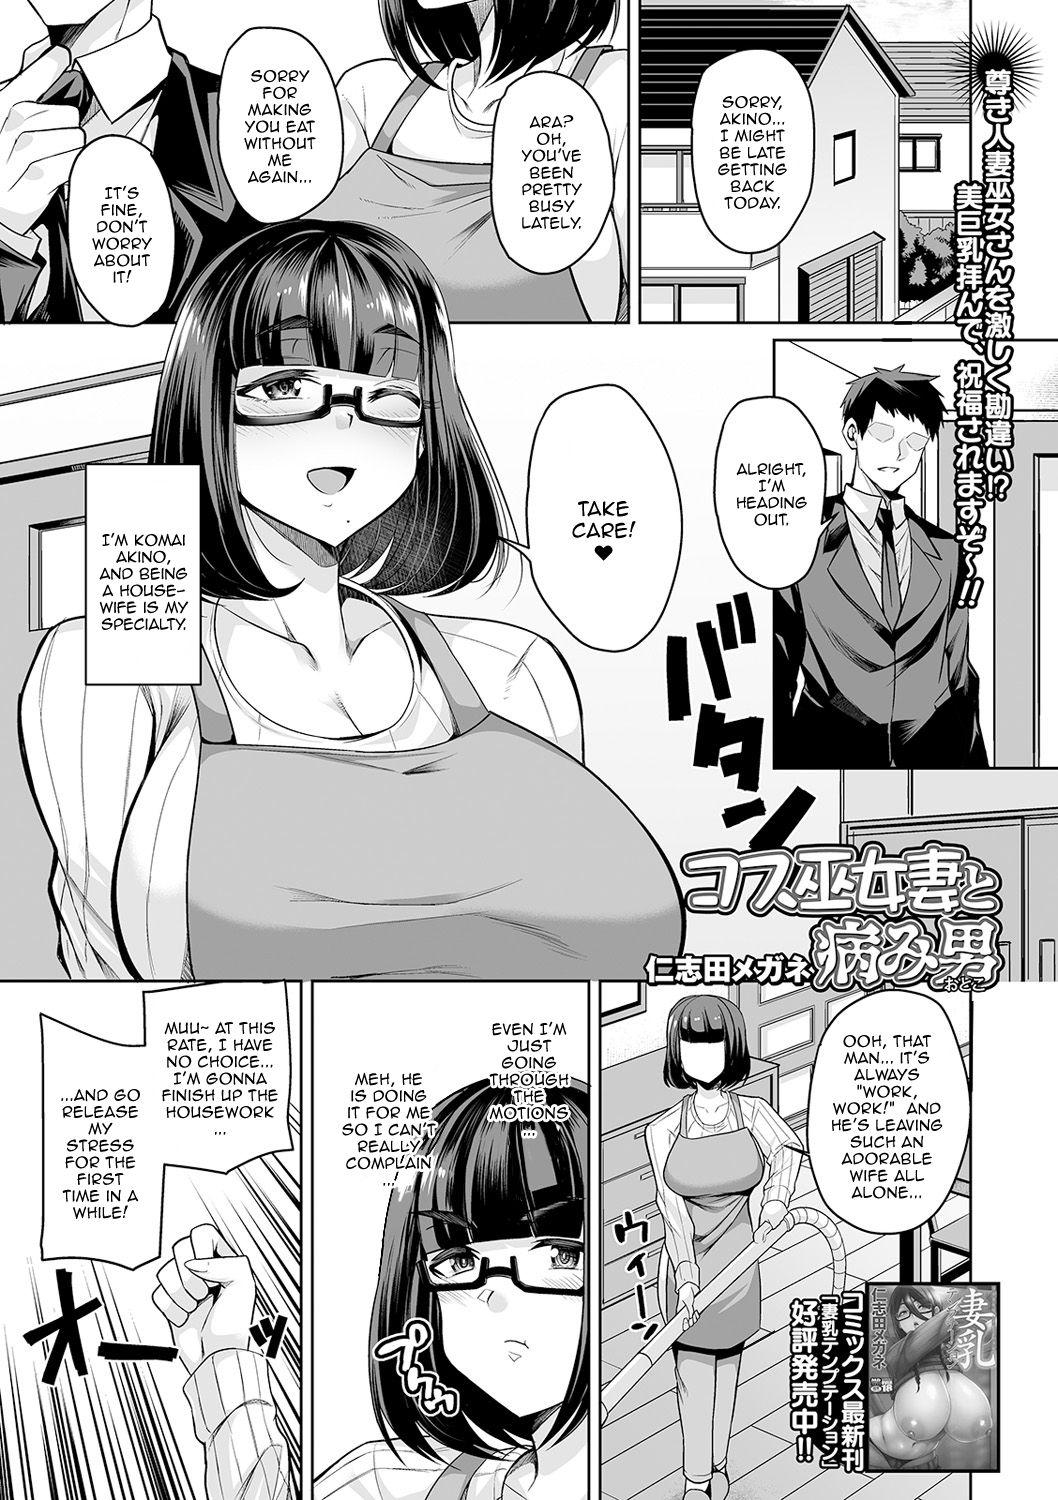 Natural Tits Cos Miko Zuma to Yami Otoko | The Cosplaying Shrine Maiden And The Suffering Man Spanish - Page 1